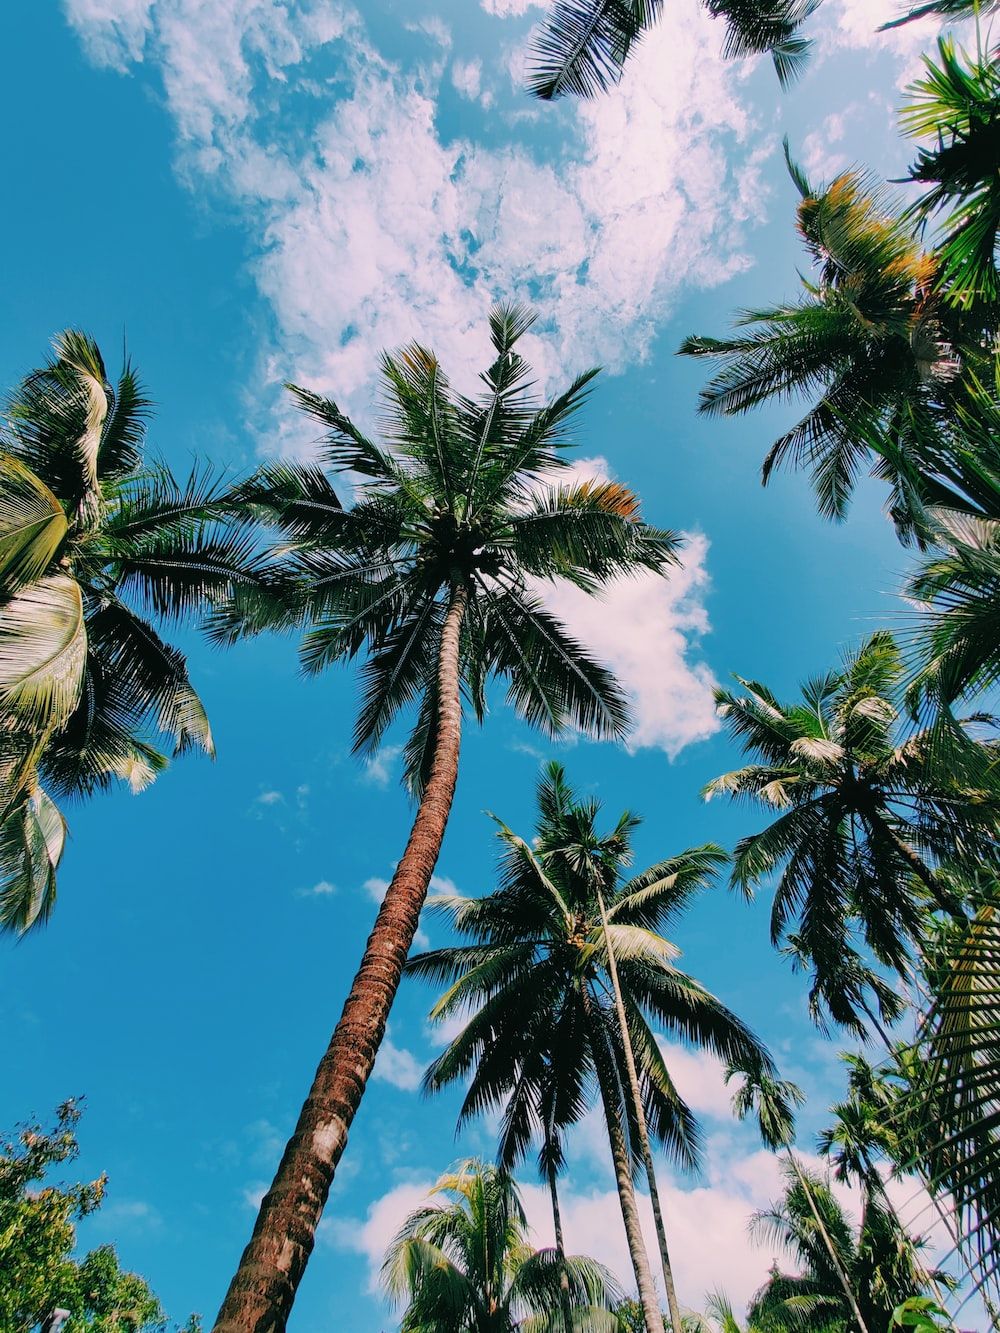 Coconut Trees Picture. Download Free Image